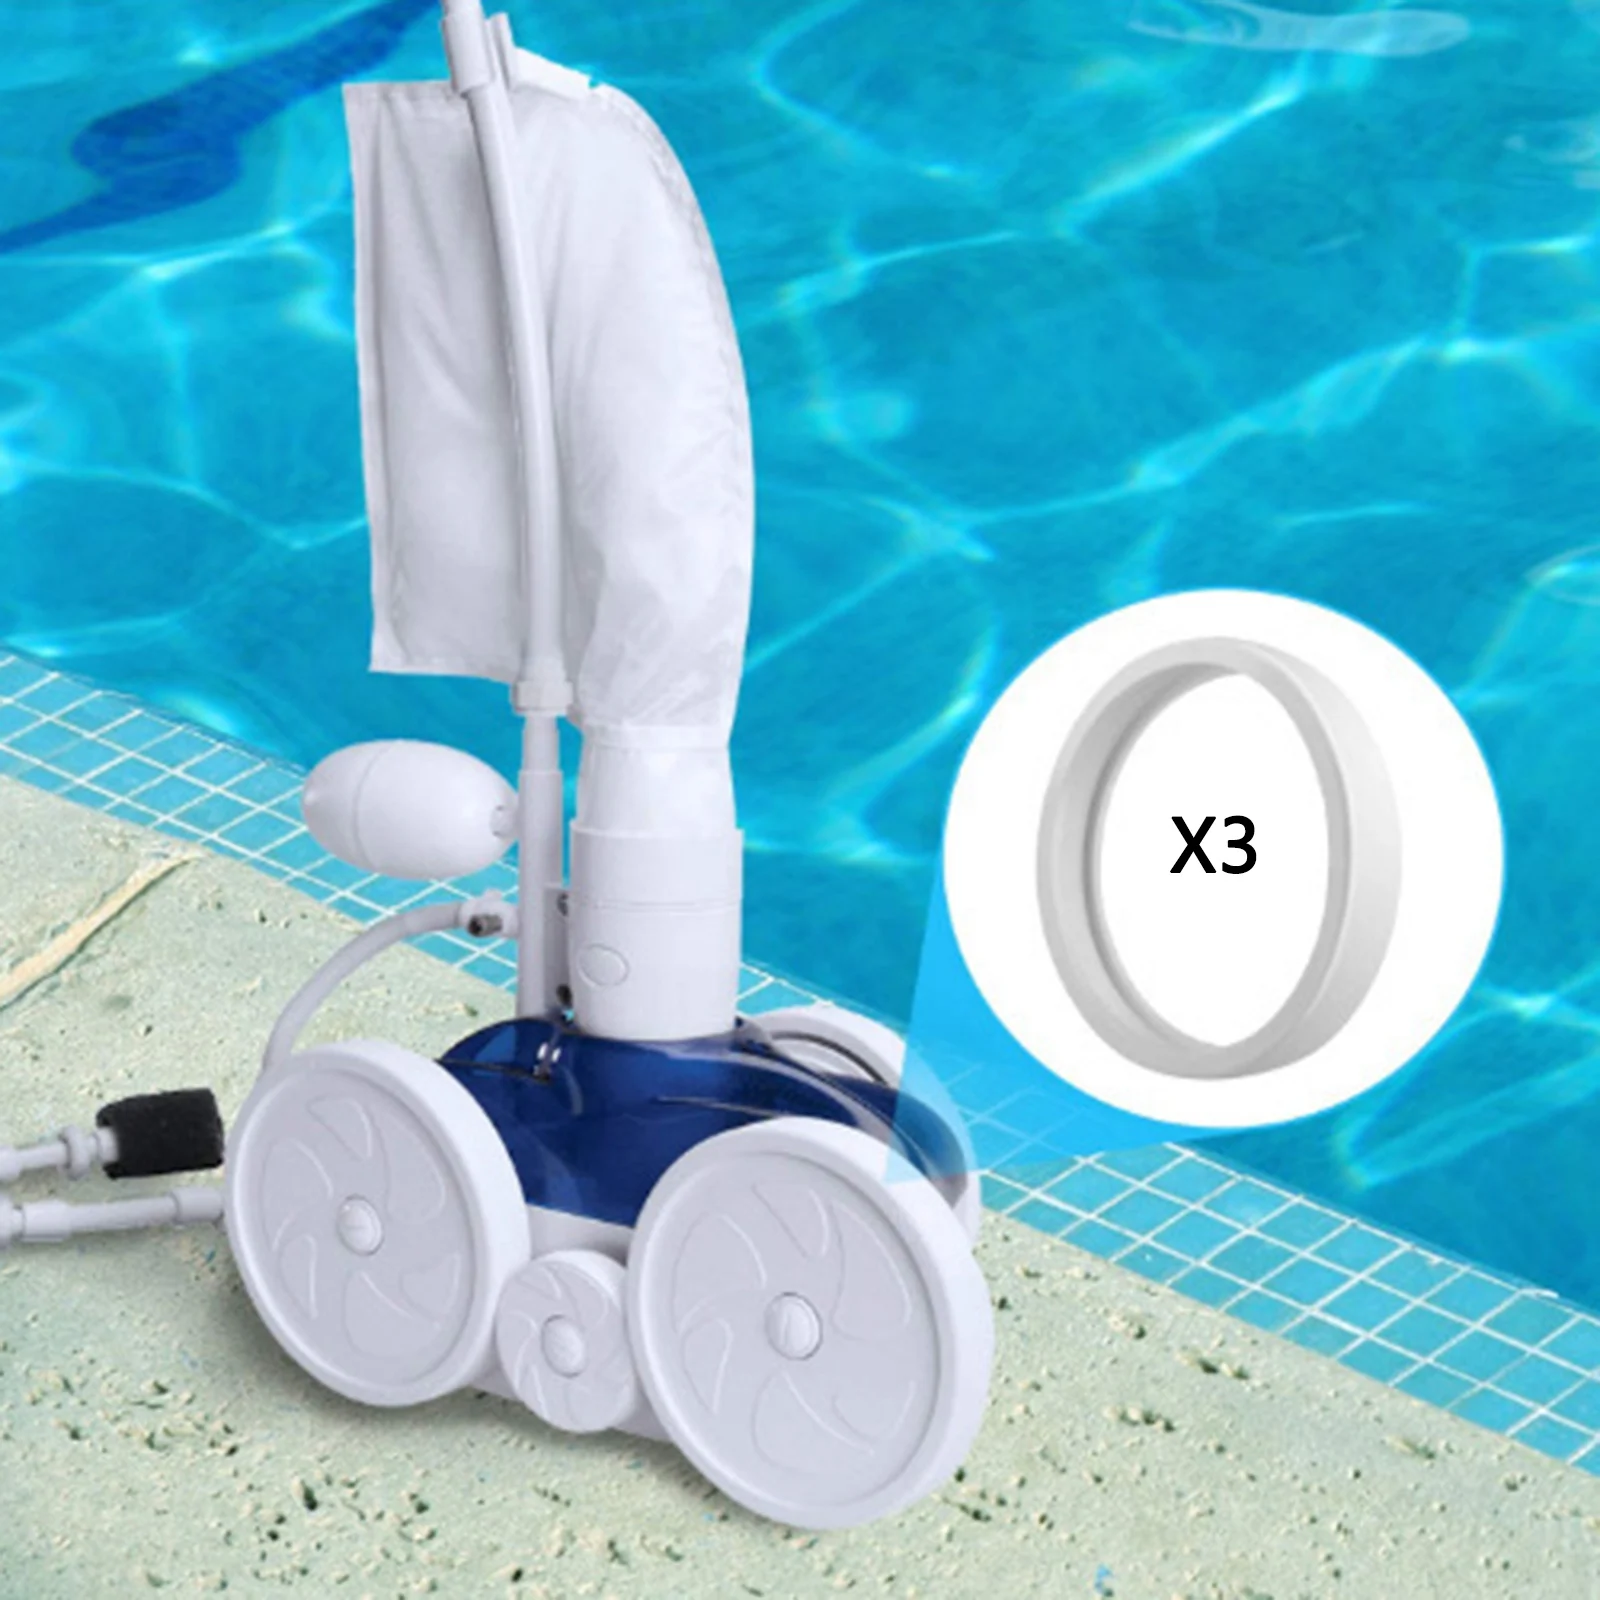 3x 17cm Pool Cleaner All Purpose Tire Replacement For Polaris 180 280 360 380 Pool Clean Machine Accessories